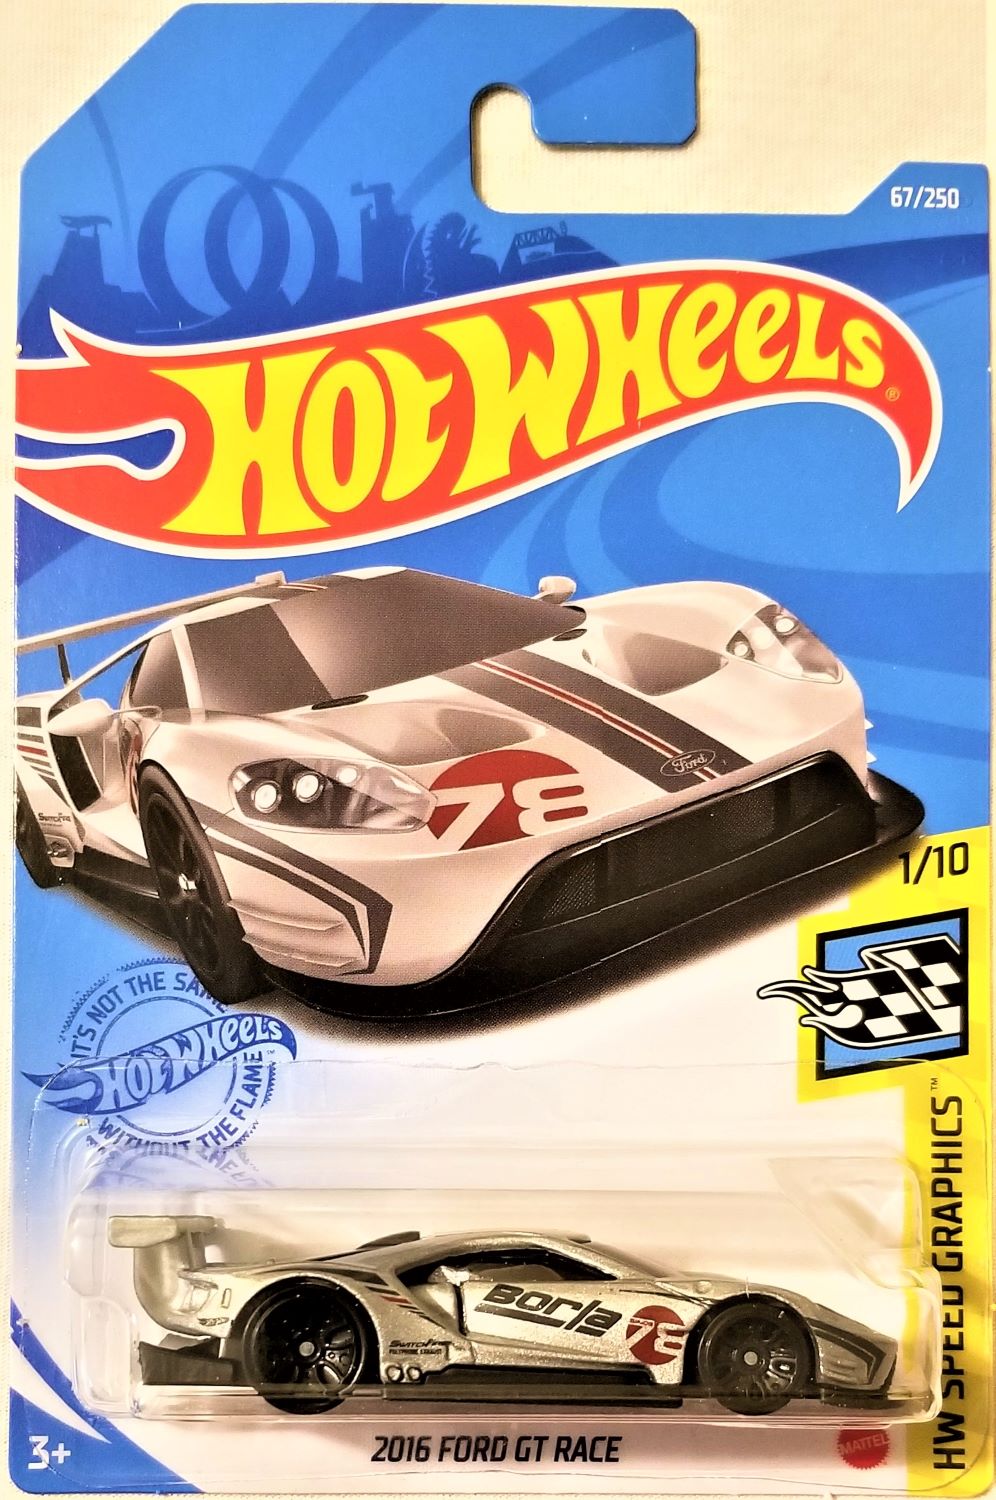 Hot Wheels 21 Hw Speed Graphics 1 10 16 Ford Gt Race 67 250 gry40 Ebay